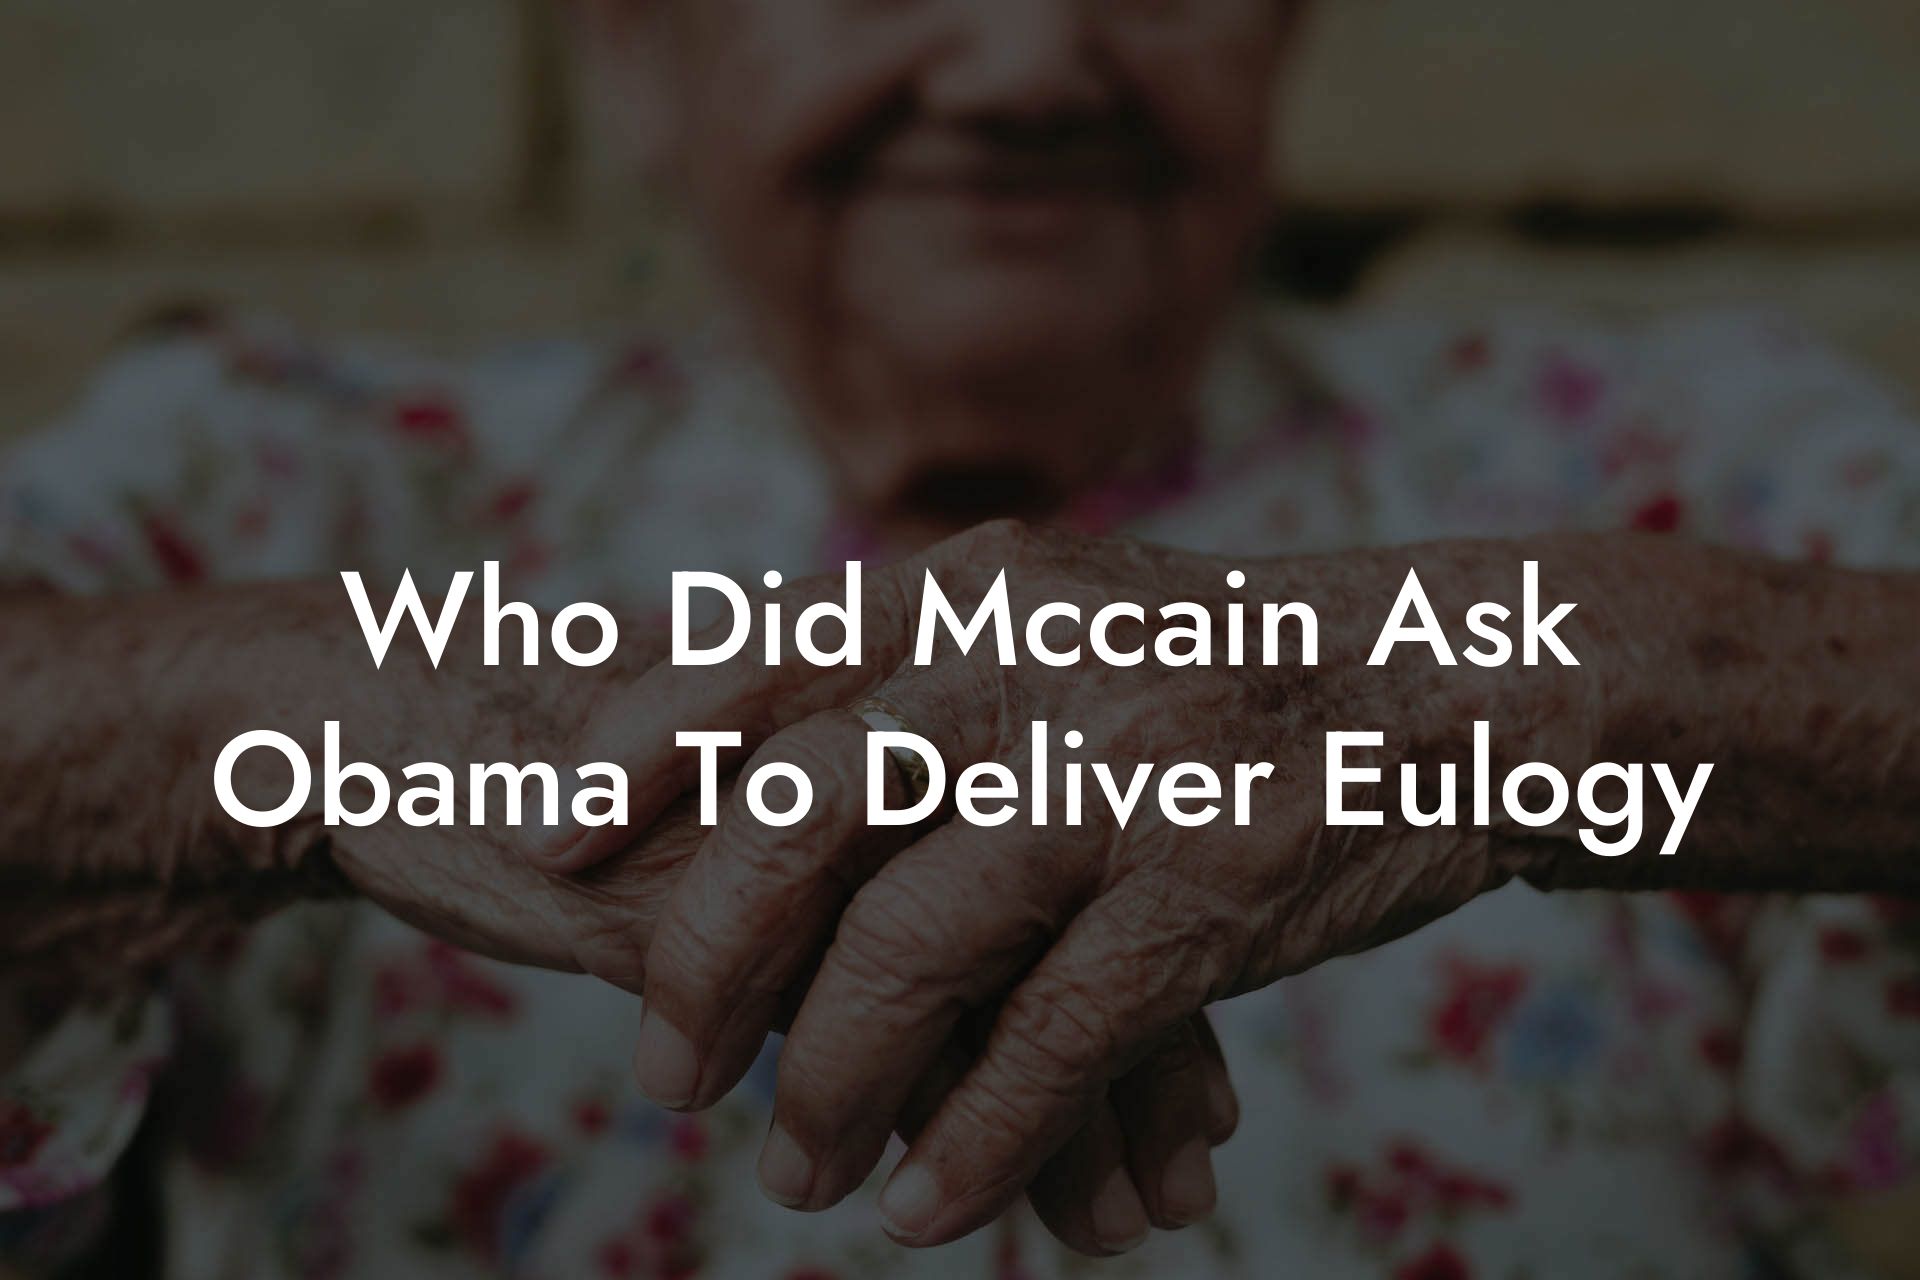 Who Did Mccain Ask Obama To Deliver Eulogy